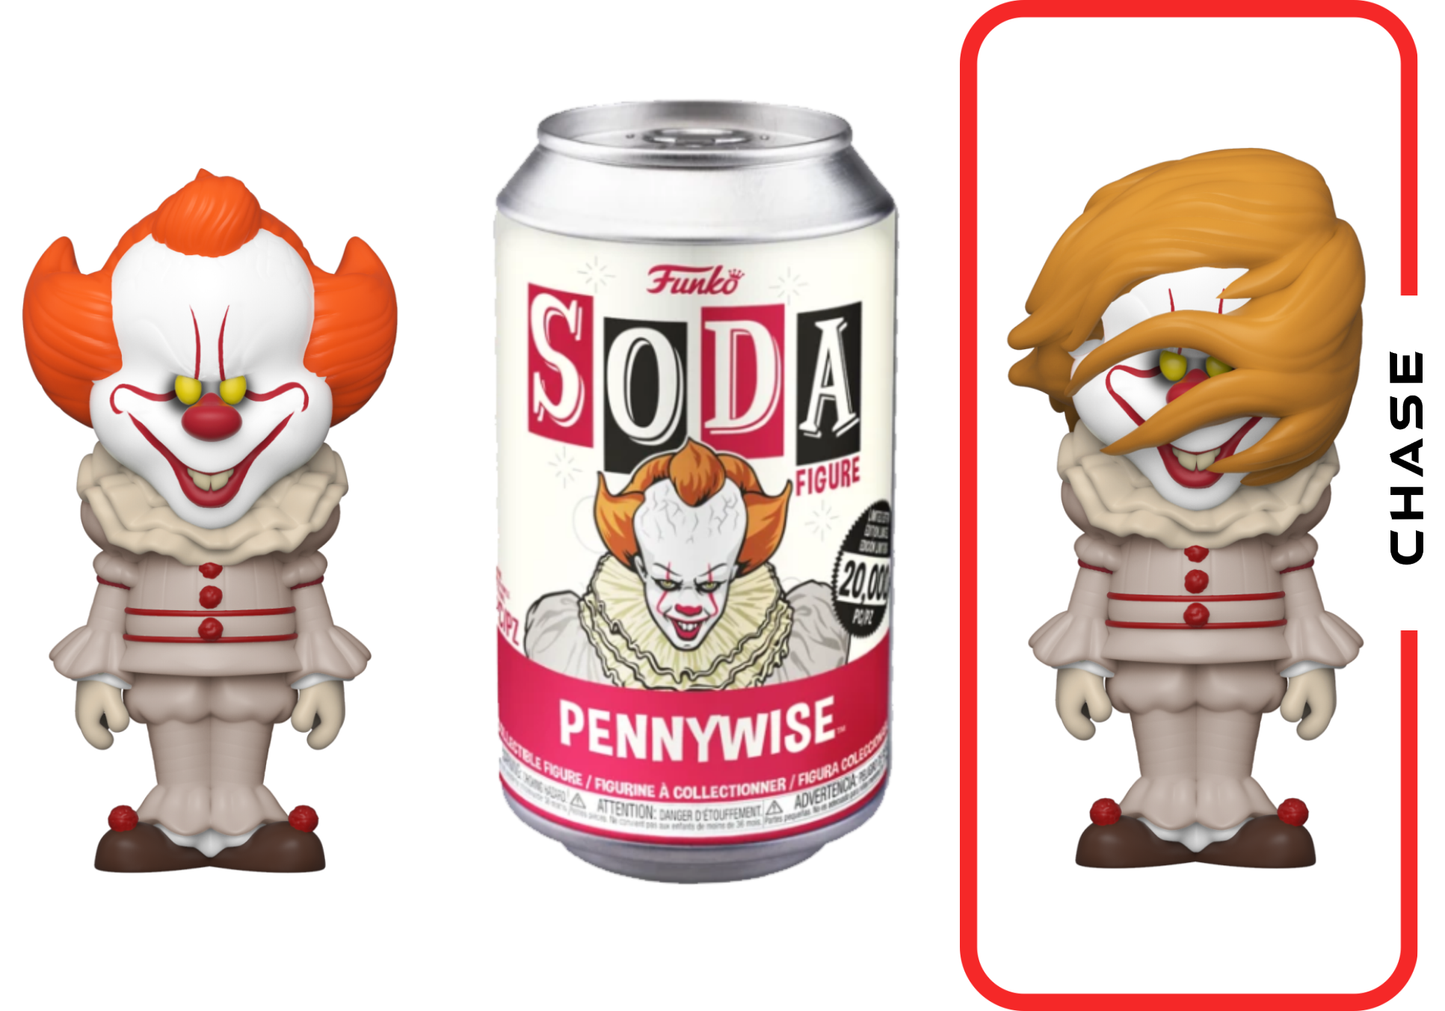 Vinyl Soda: IT - Pennywise LE20000 (with Chance of Chase)